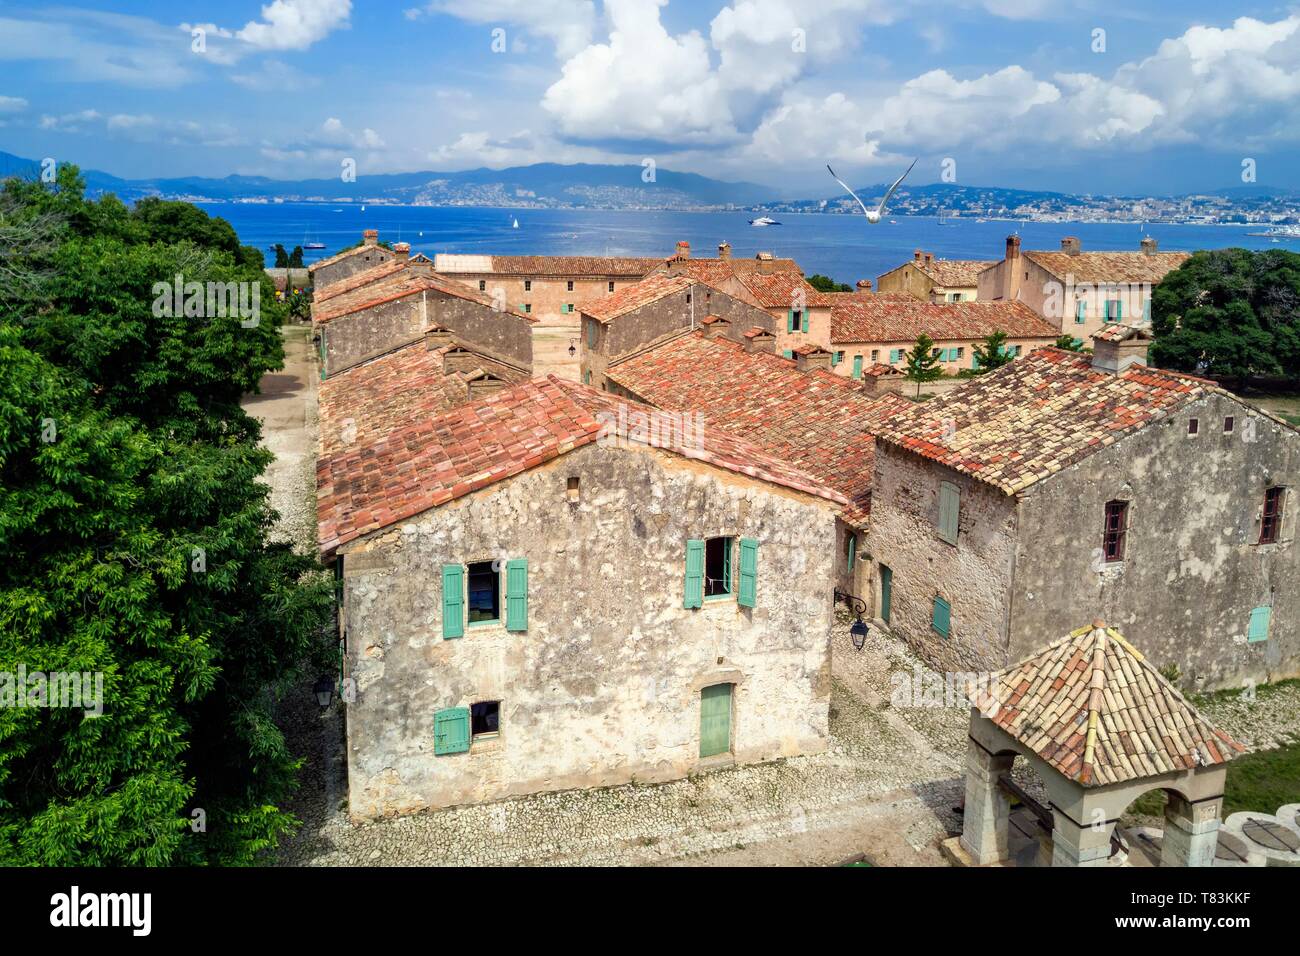 France, Alpes Maritimes, Lerins Islands, Sainte Marguerite island, the Fort Royal fortified by Vauban, the well and a street Stock Photo